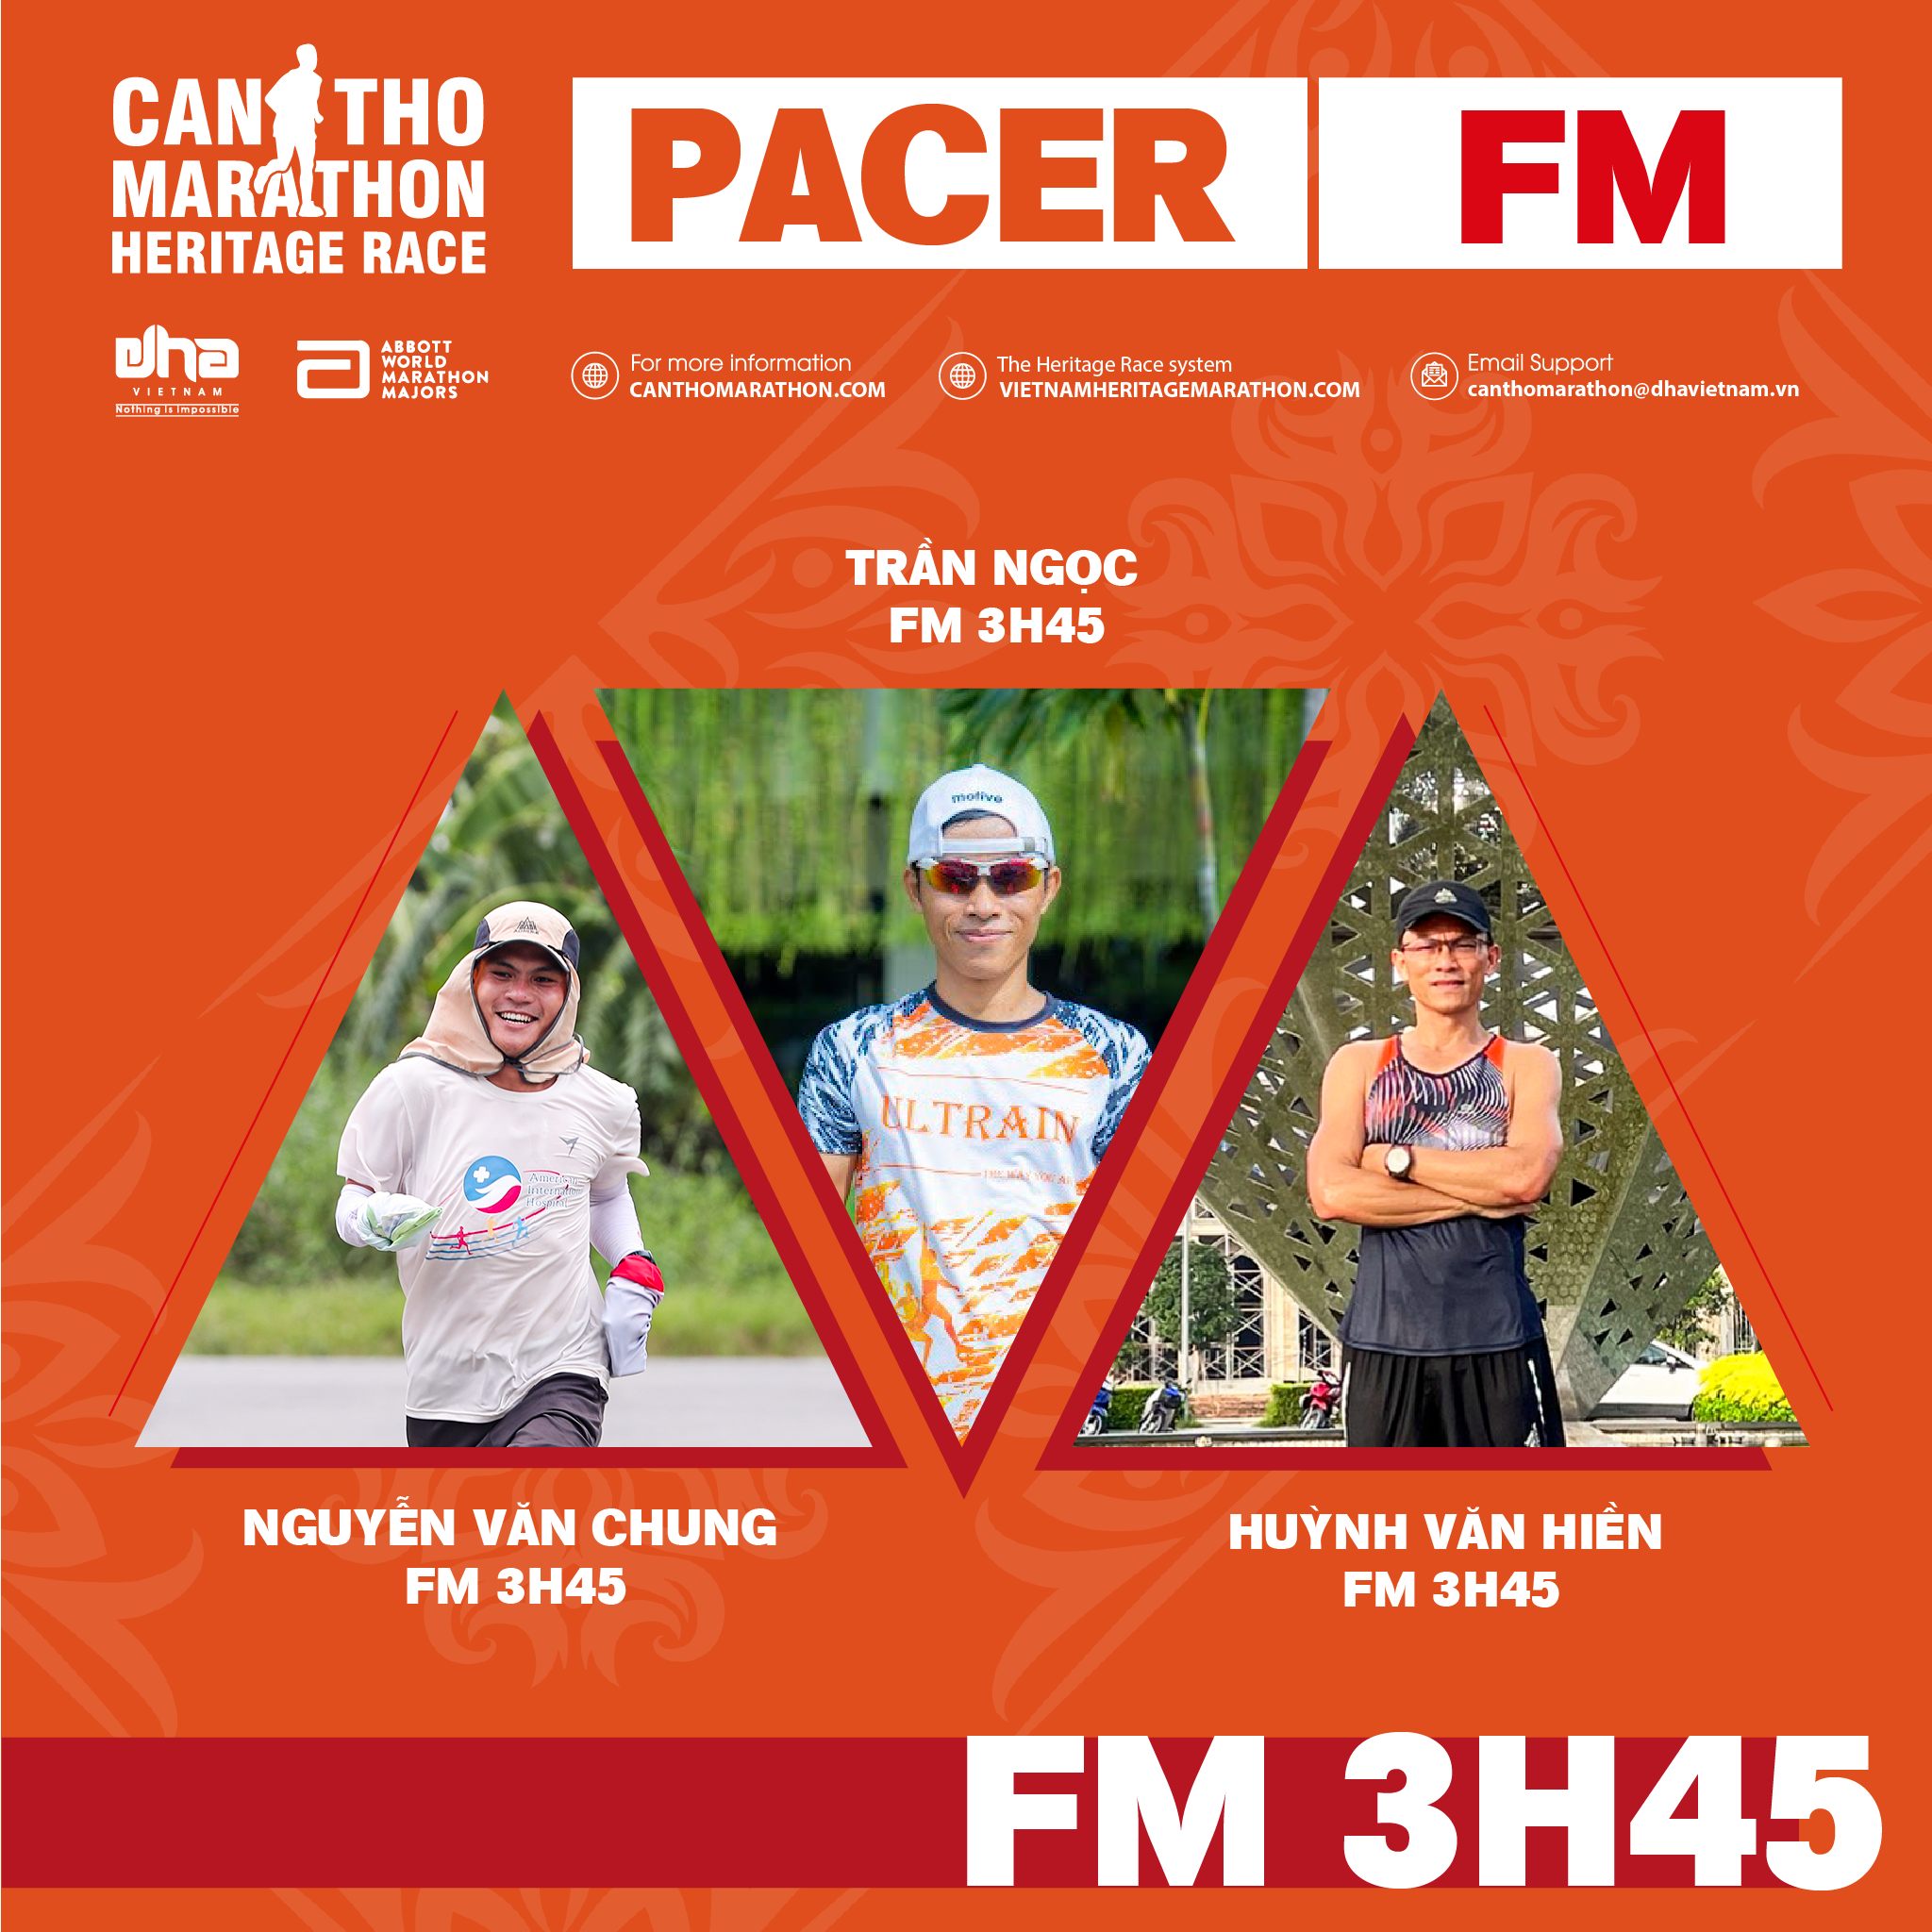 Can Tho Marathon – A Heritage Race 2022: Pacer Team